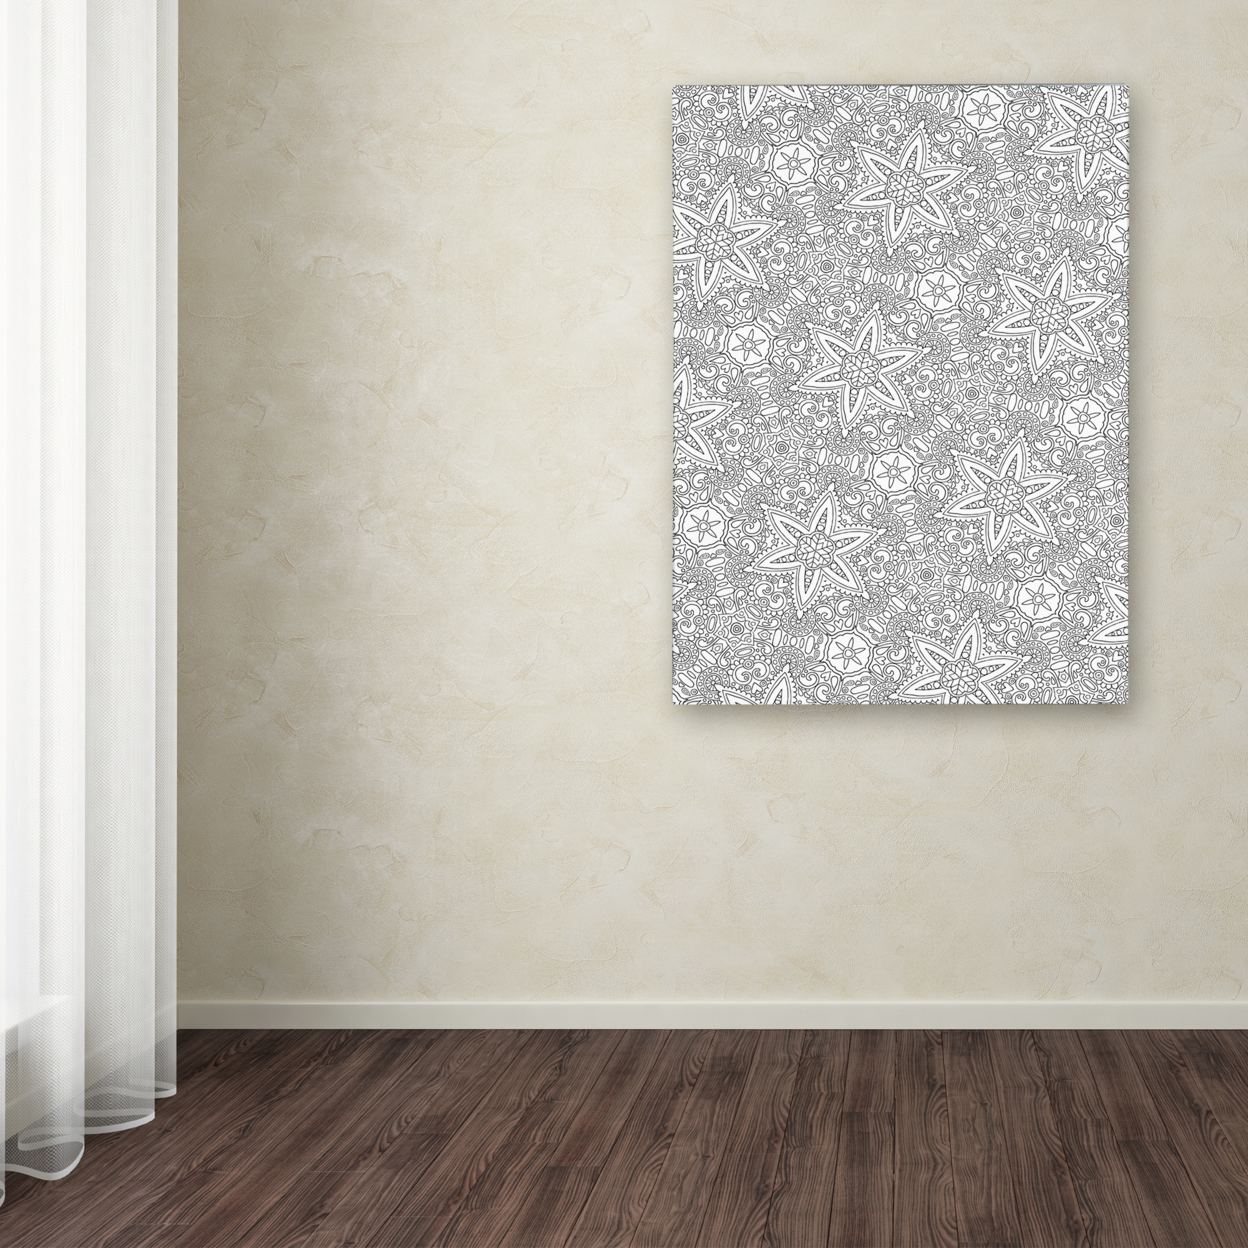 Hello Angel 'Kaleidoscope One' Canvas Wall Art 35 X 47 Inches